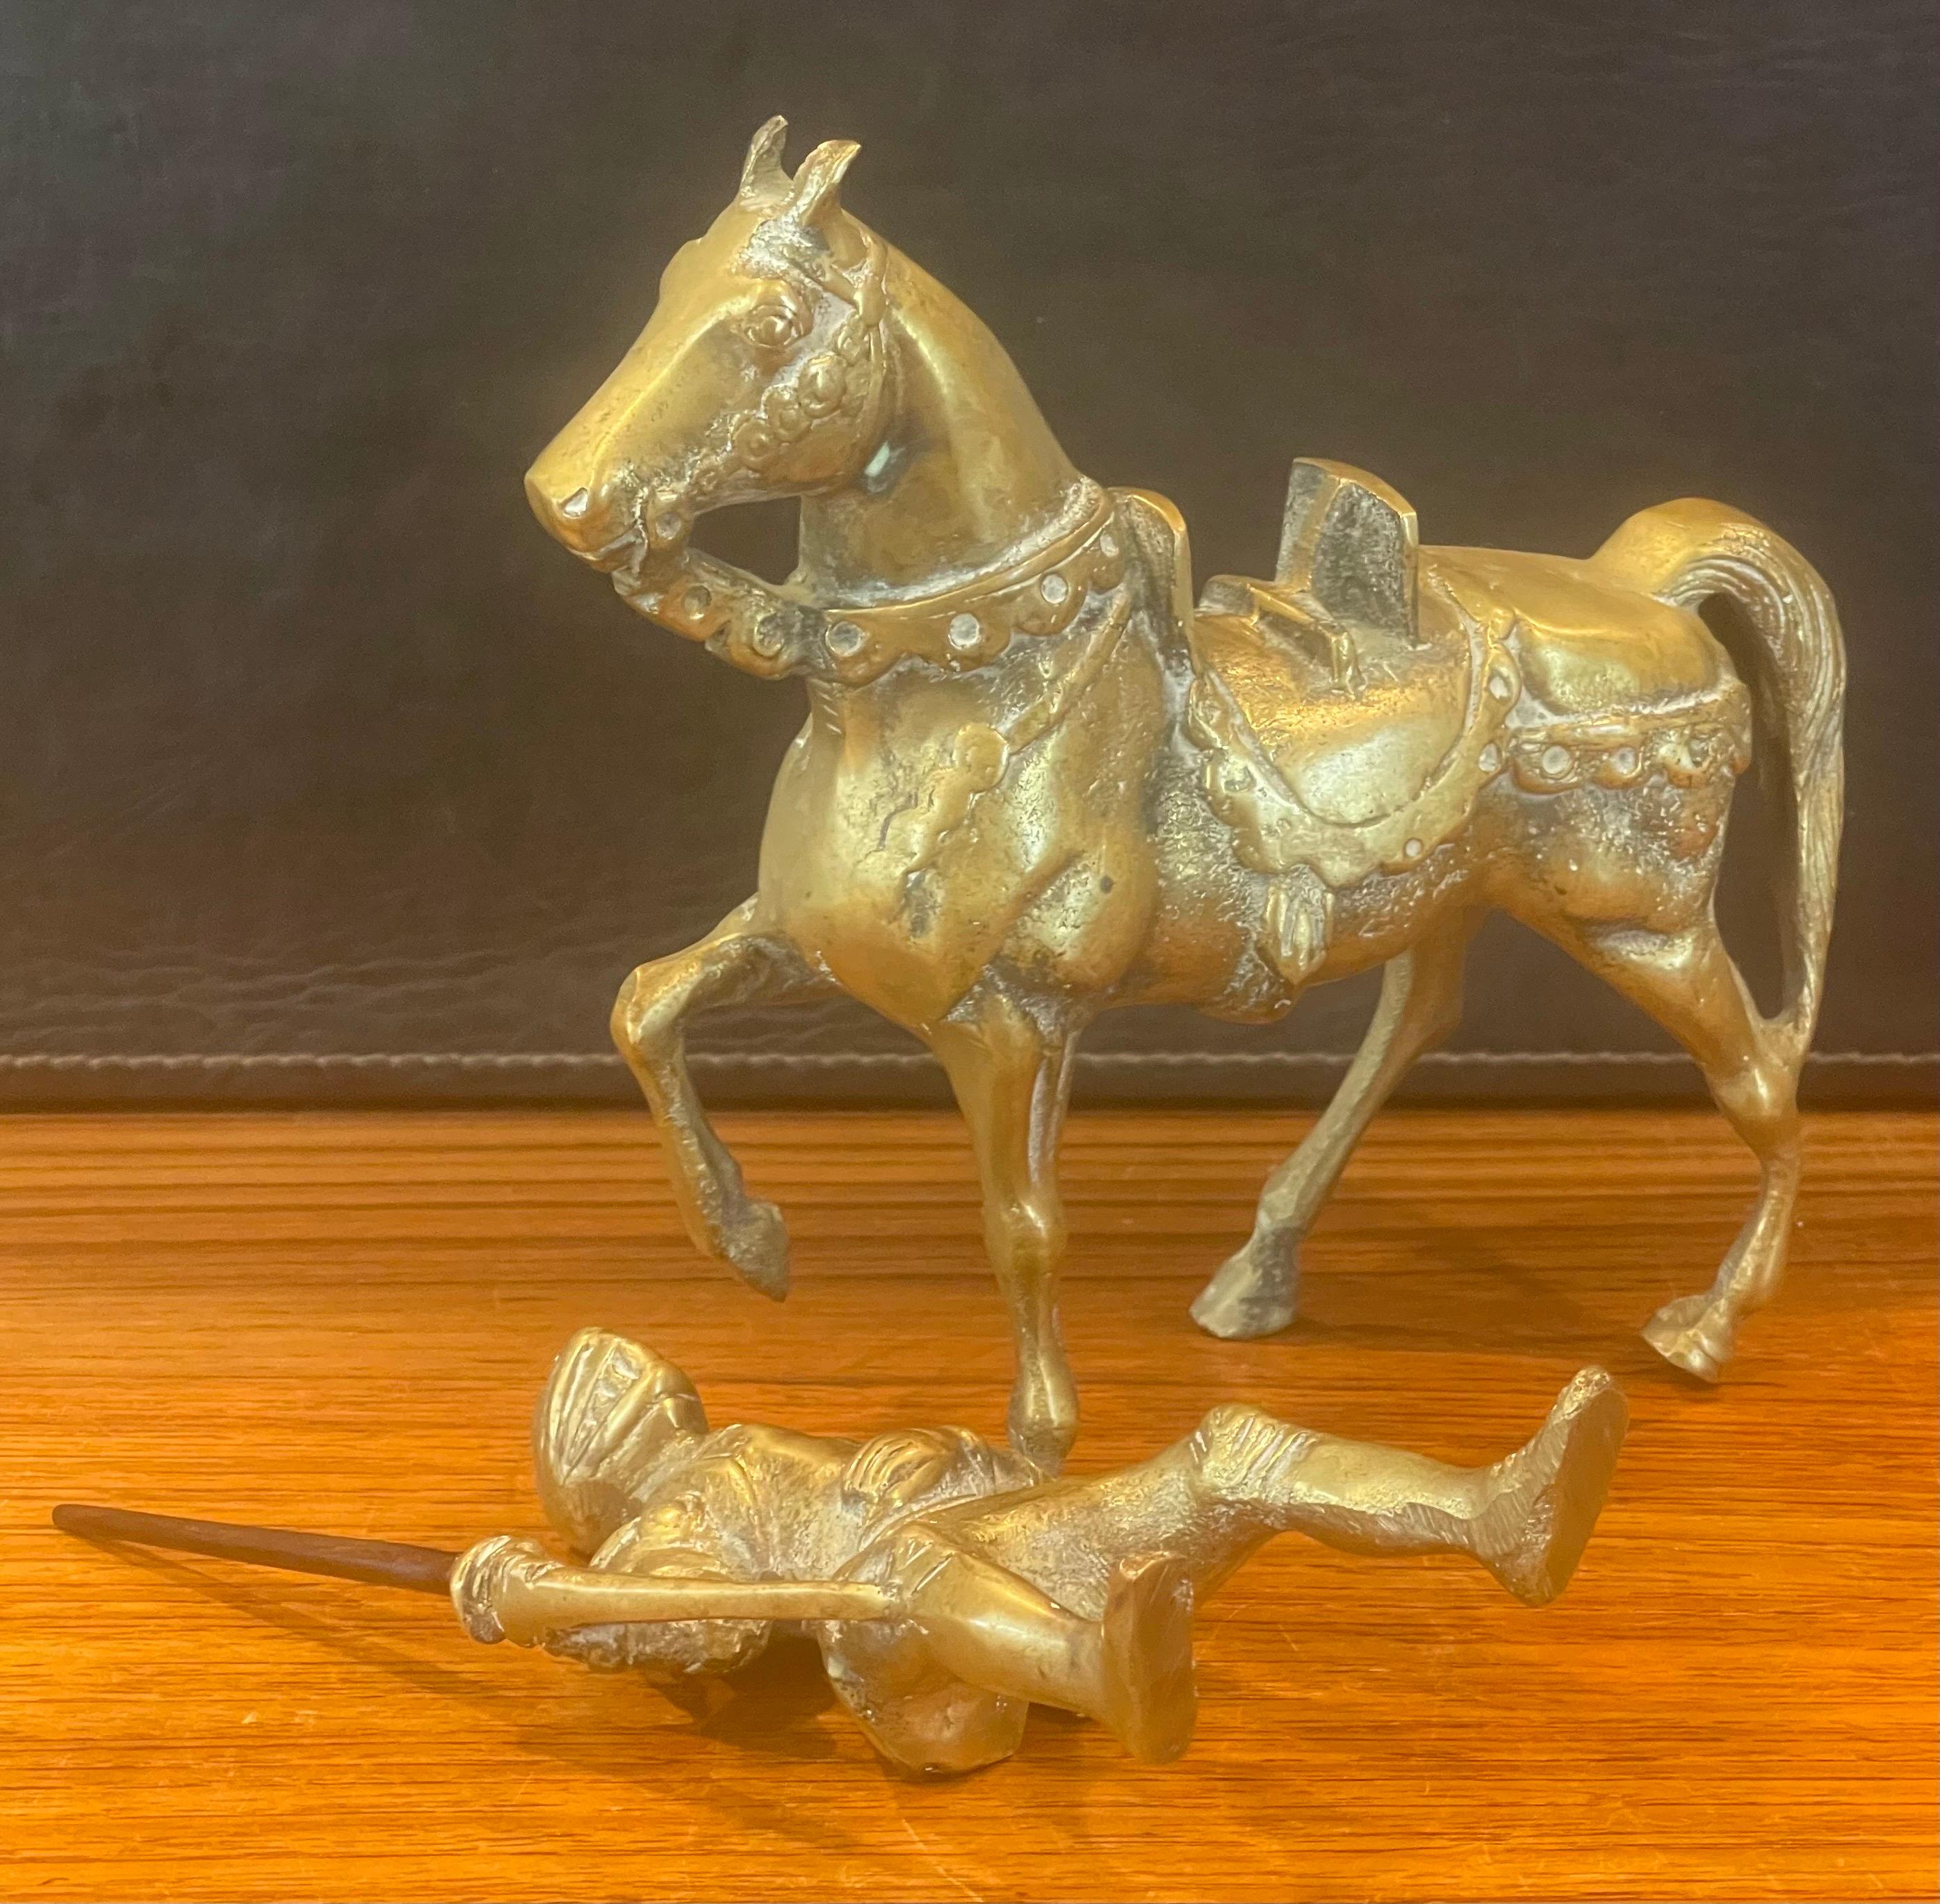 Solid Cast Brass Medieval Armored Knight on Horse Sculpture For Sale 6